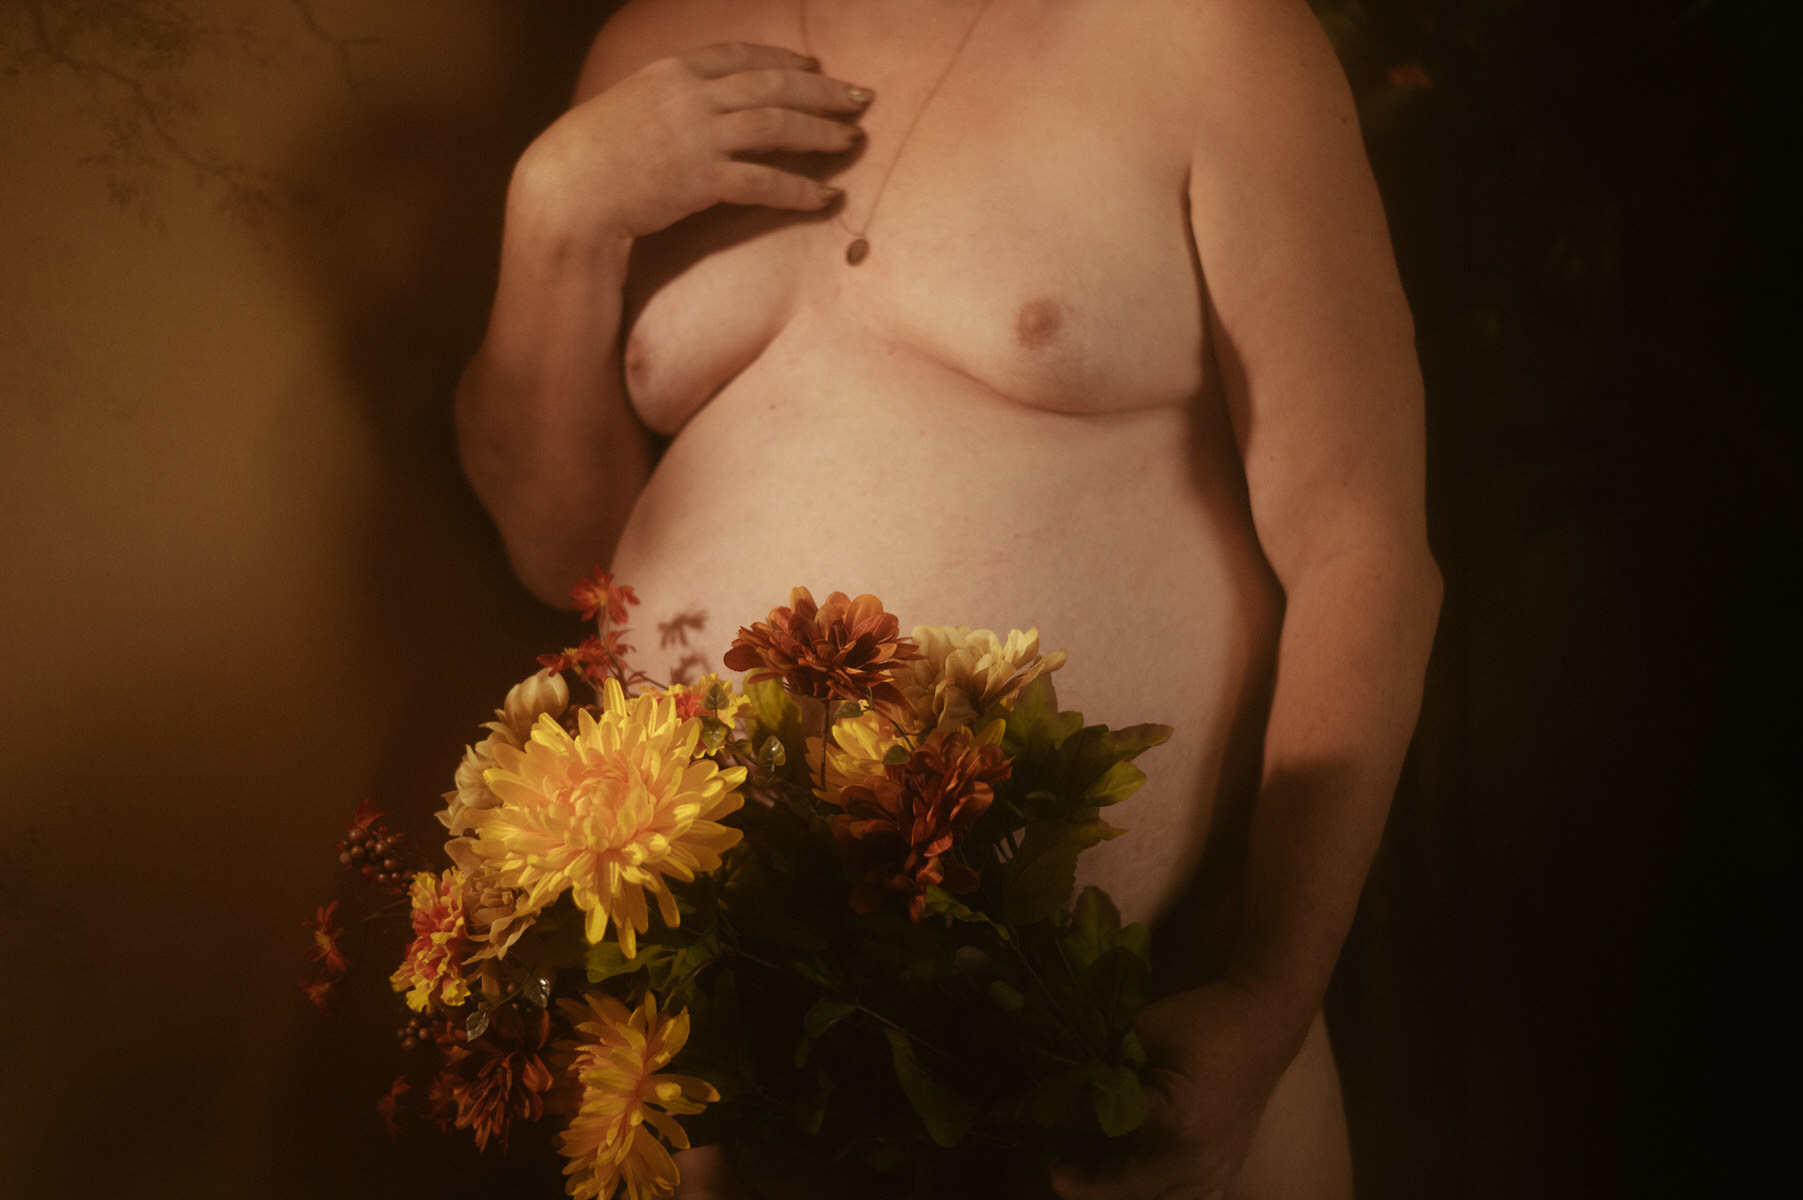 A man posing with flowers during a boudoir photoshoot.